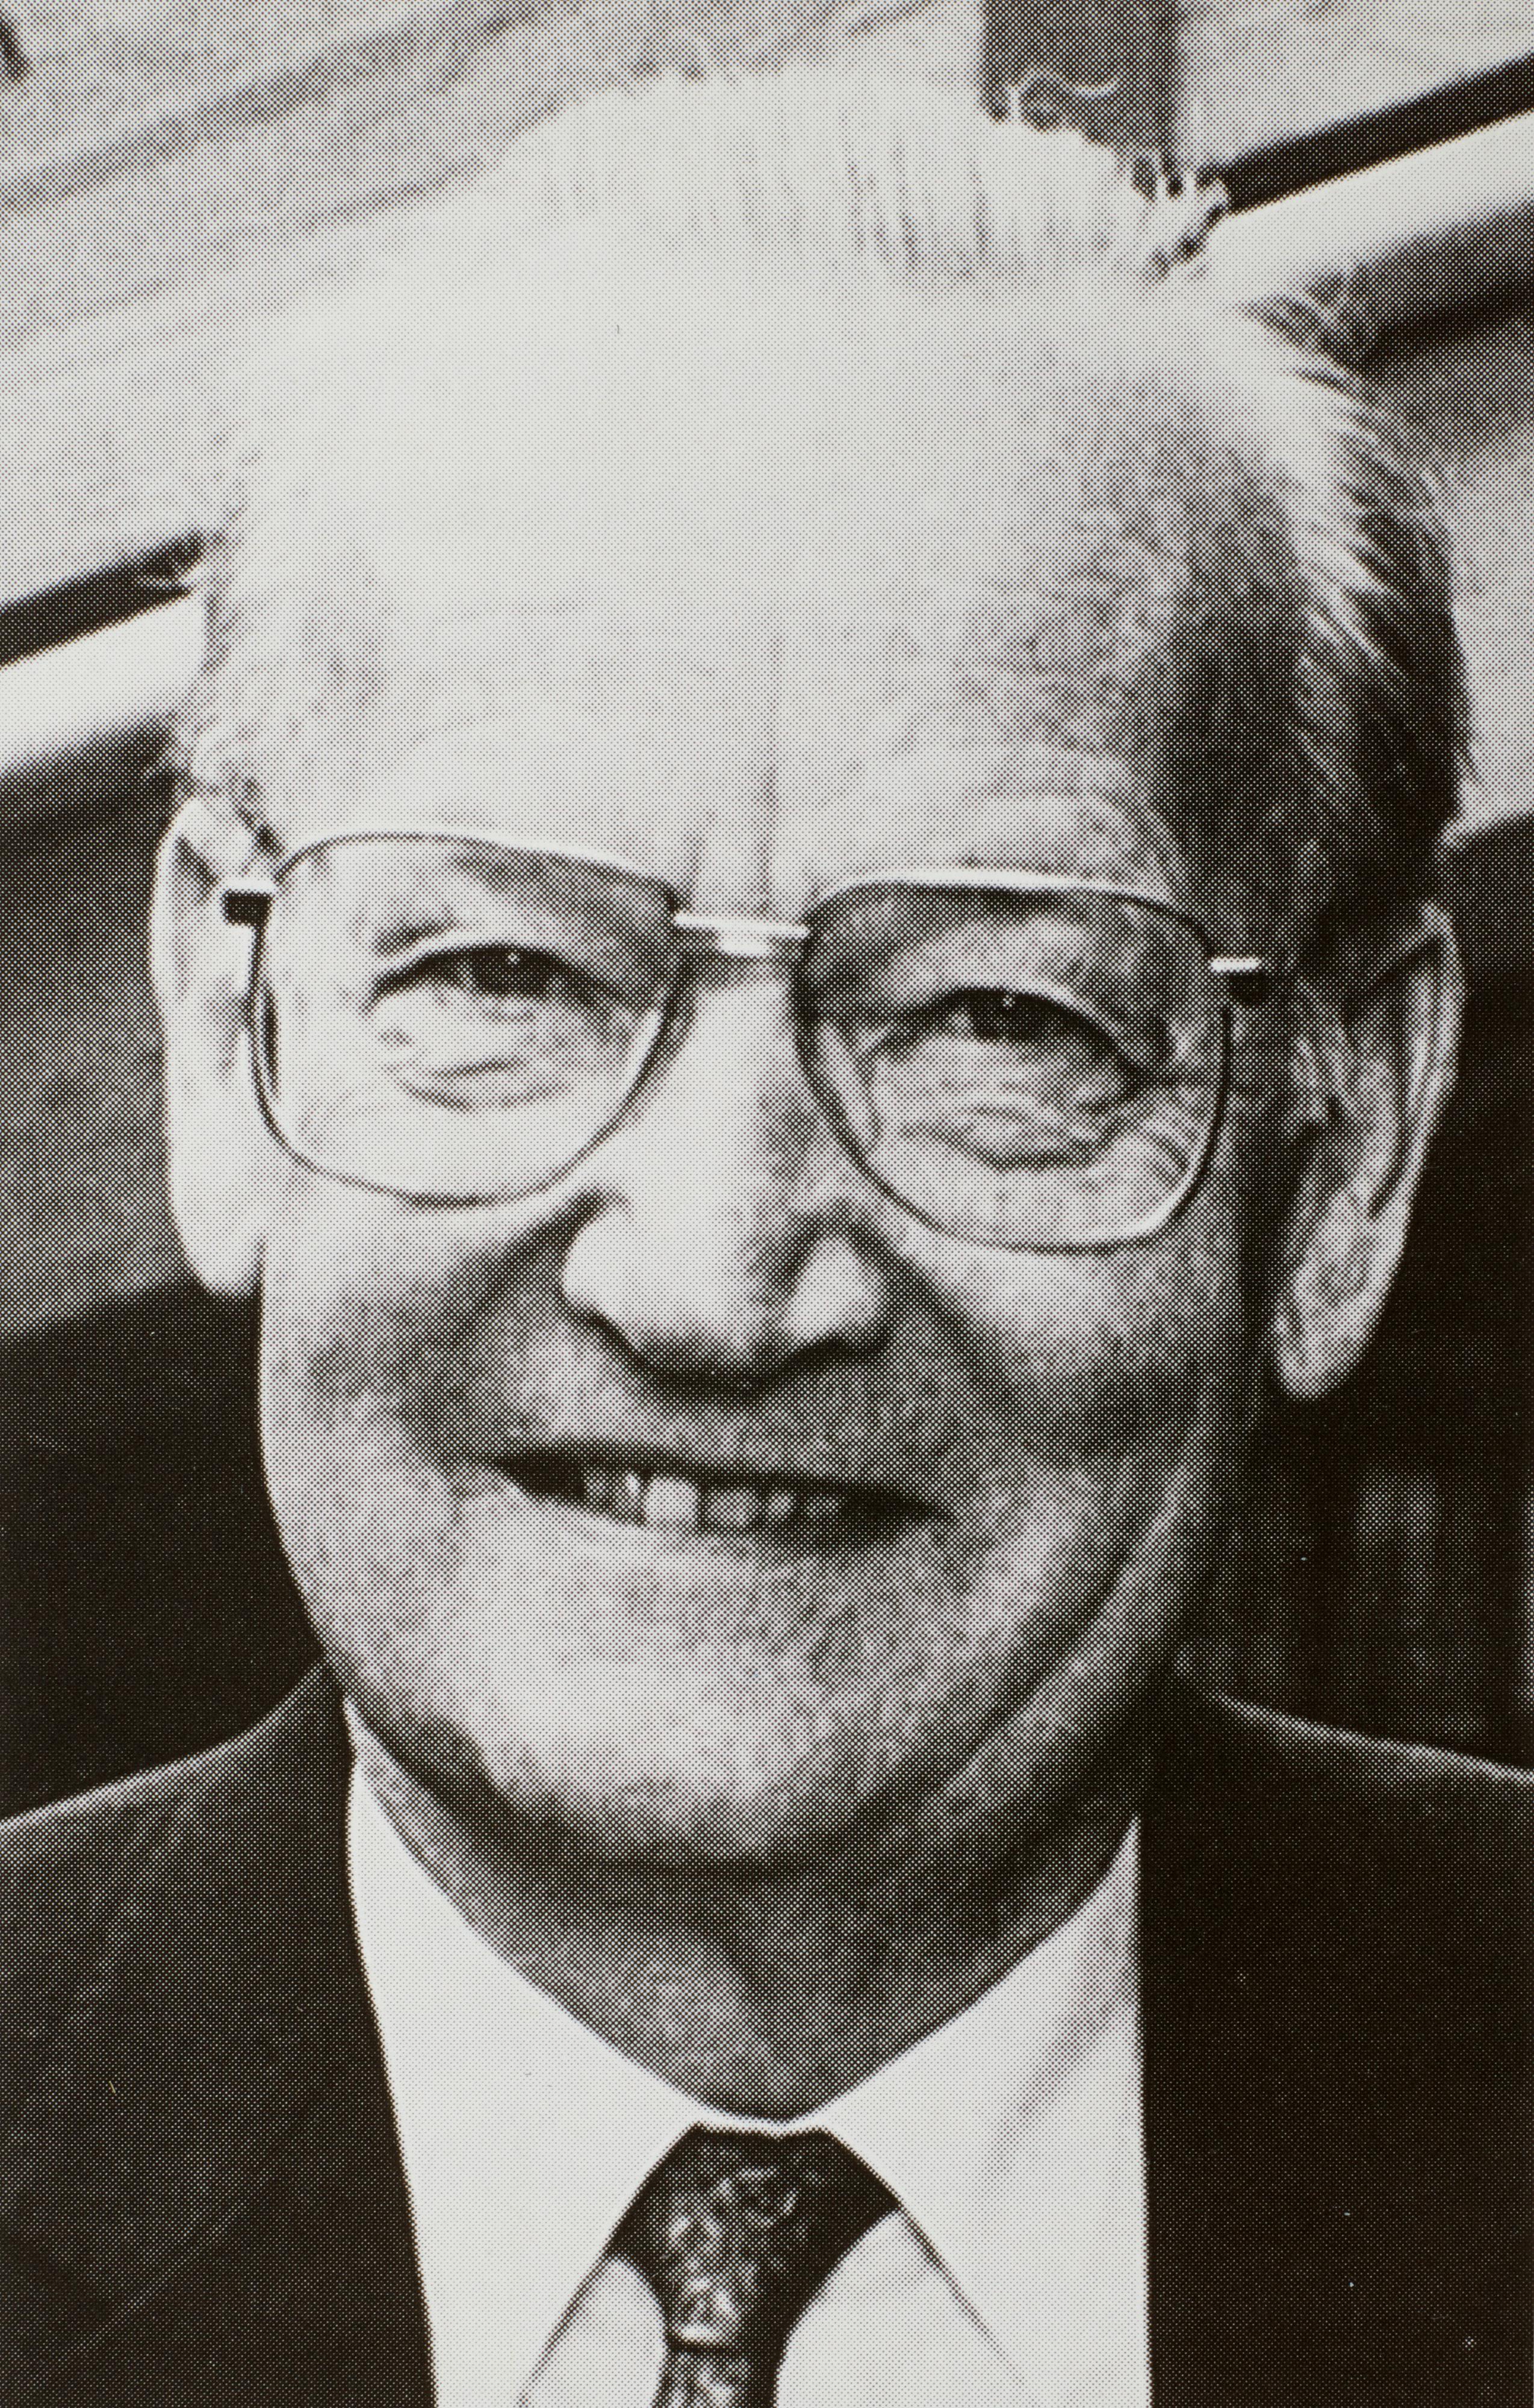 Jens Nørgaard - personal assistans to Claus Kähler. He was deeply involved in the proposal of splitting up the company in the early 1960s.